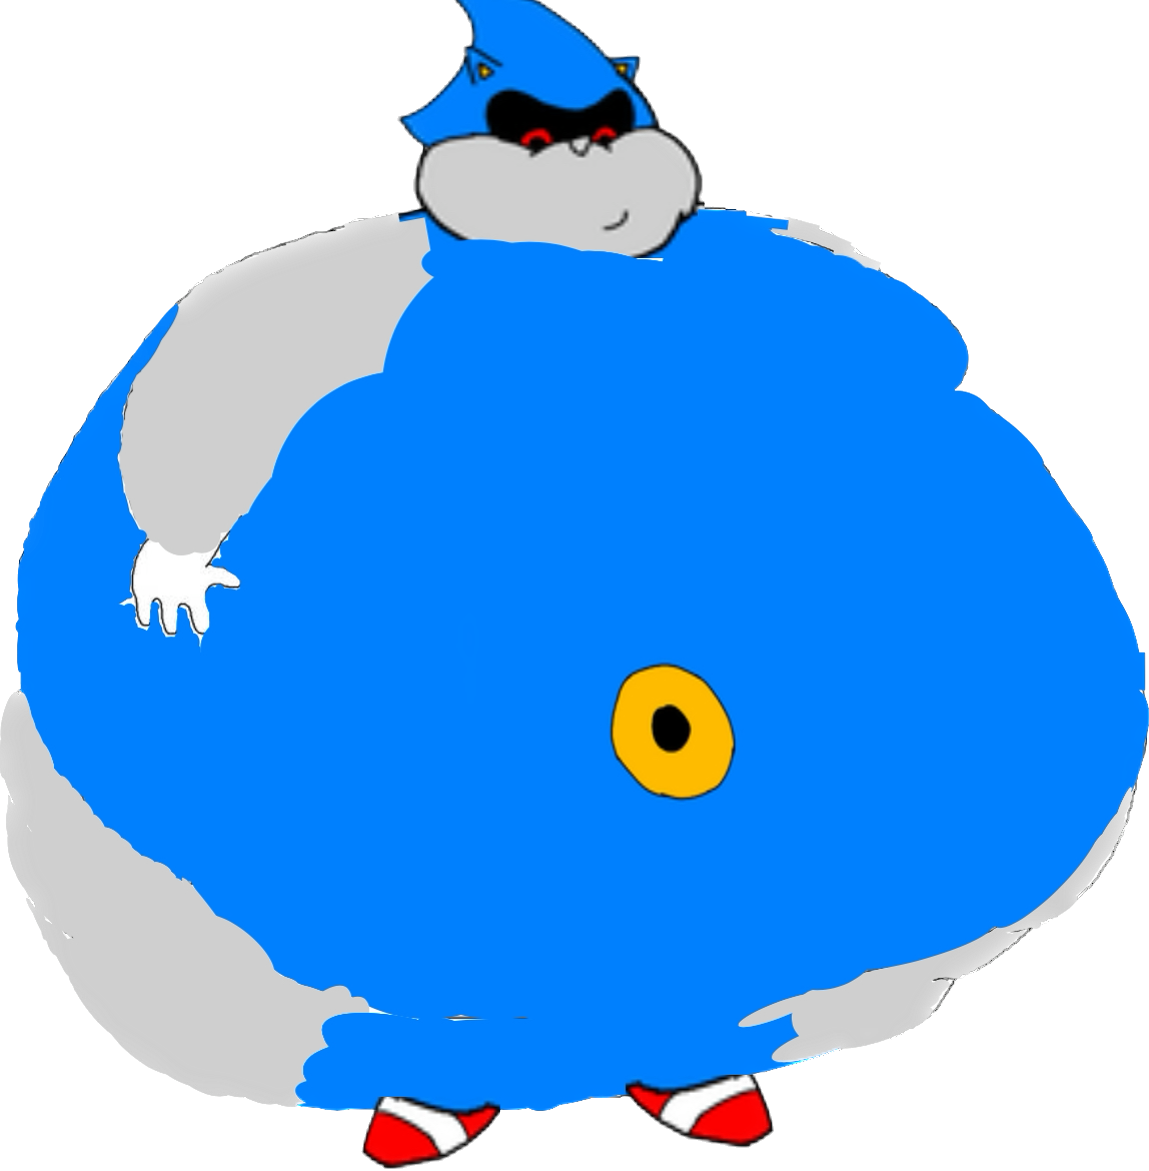 Fat Metal Sonic 2 Transparent by inflationrules on DeviantArt